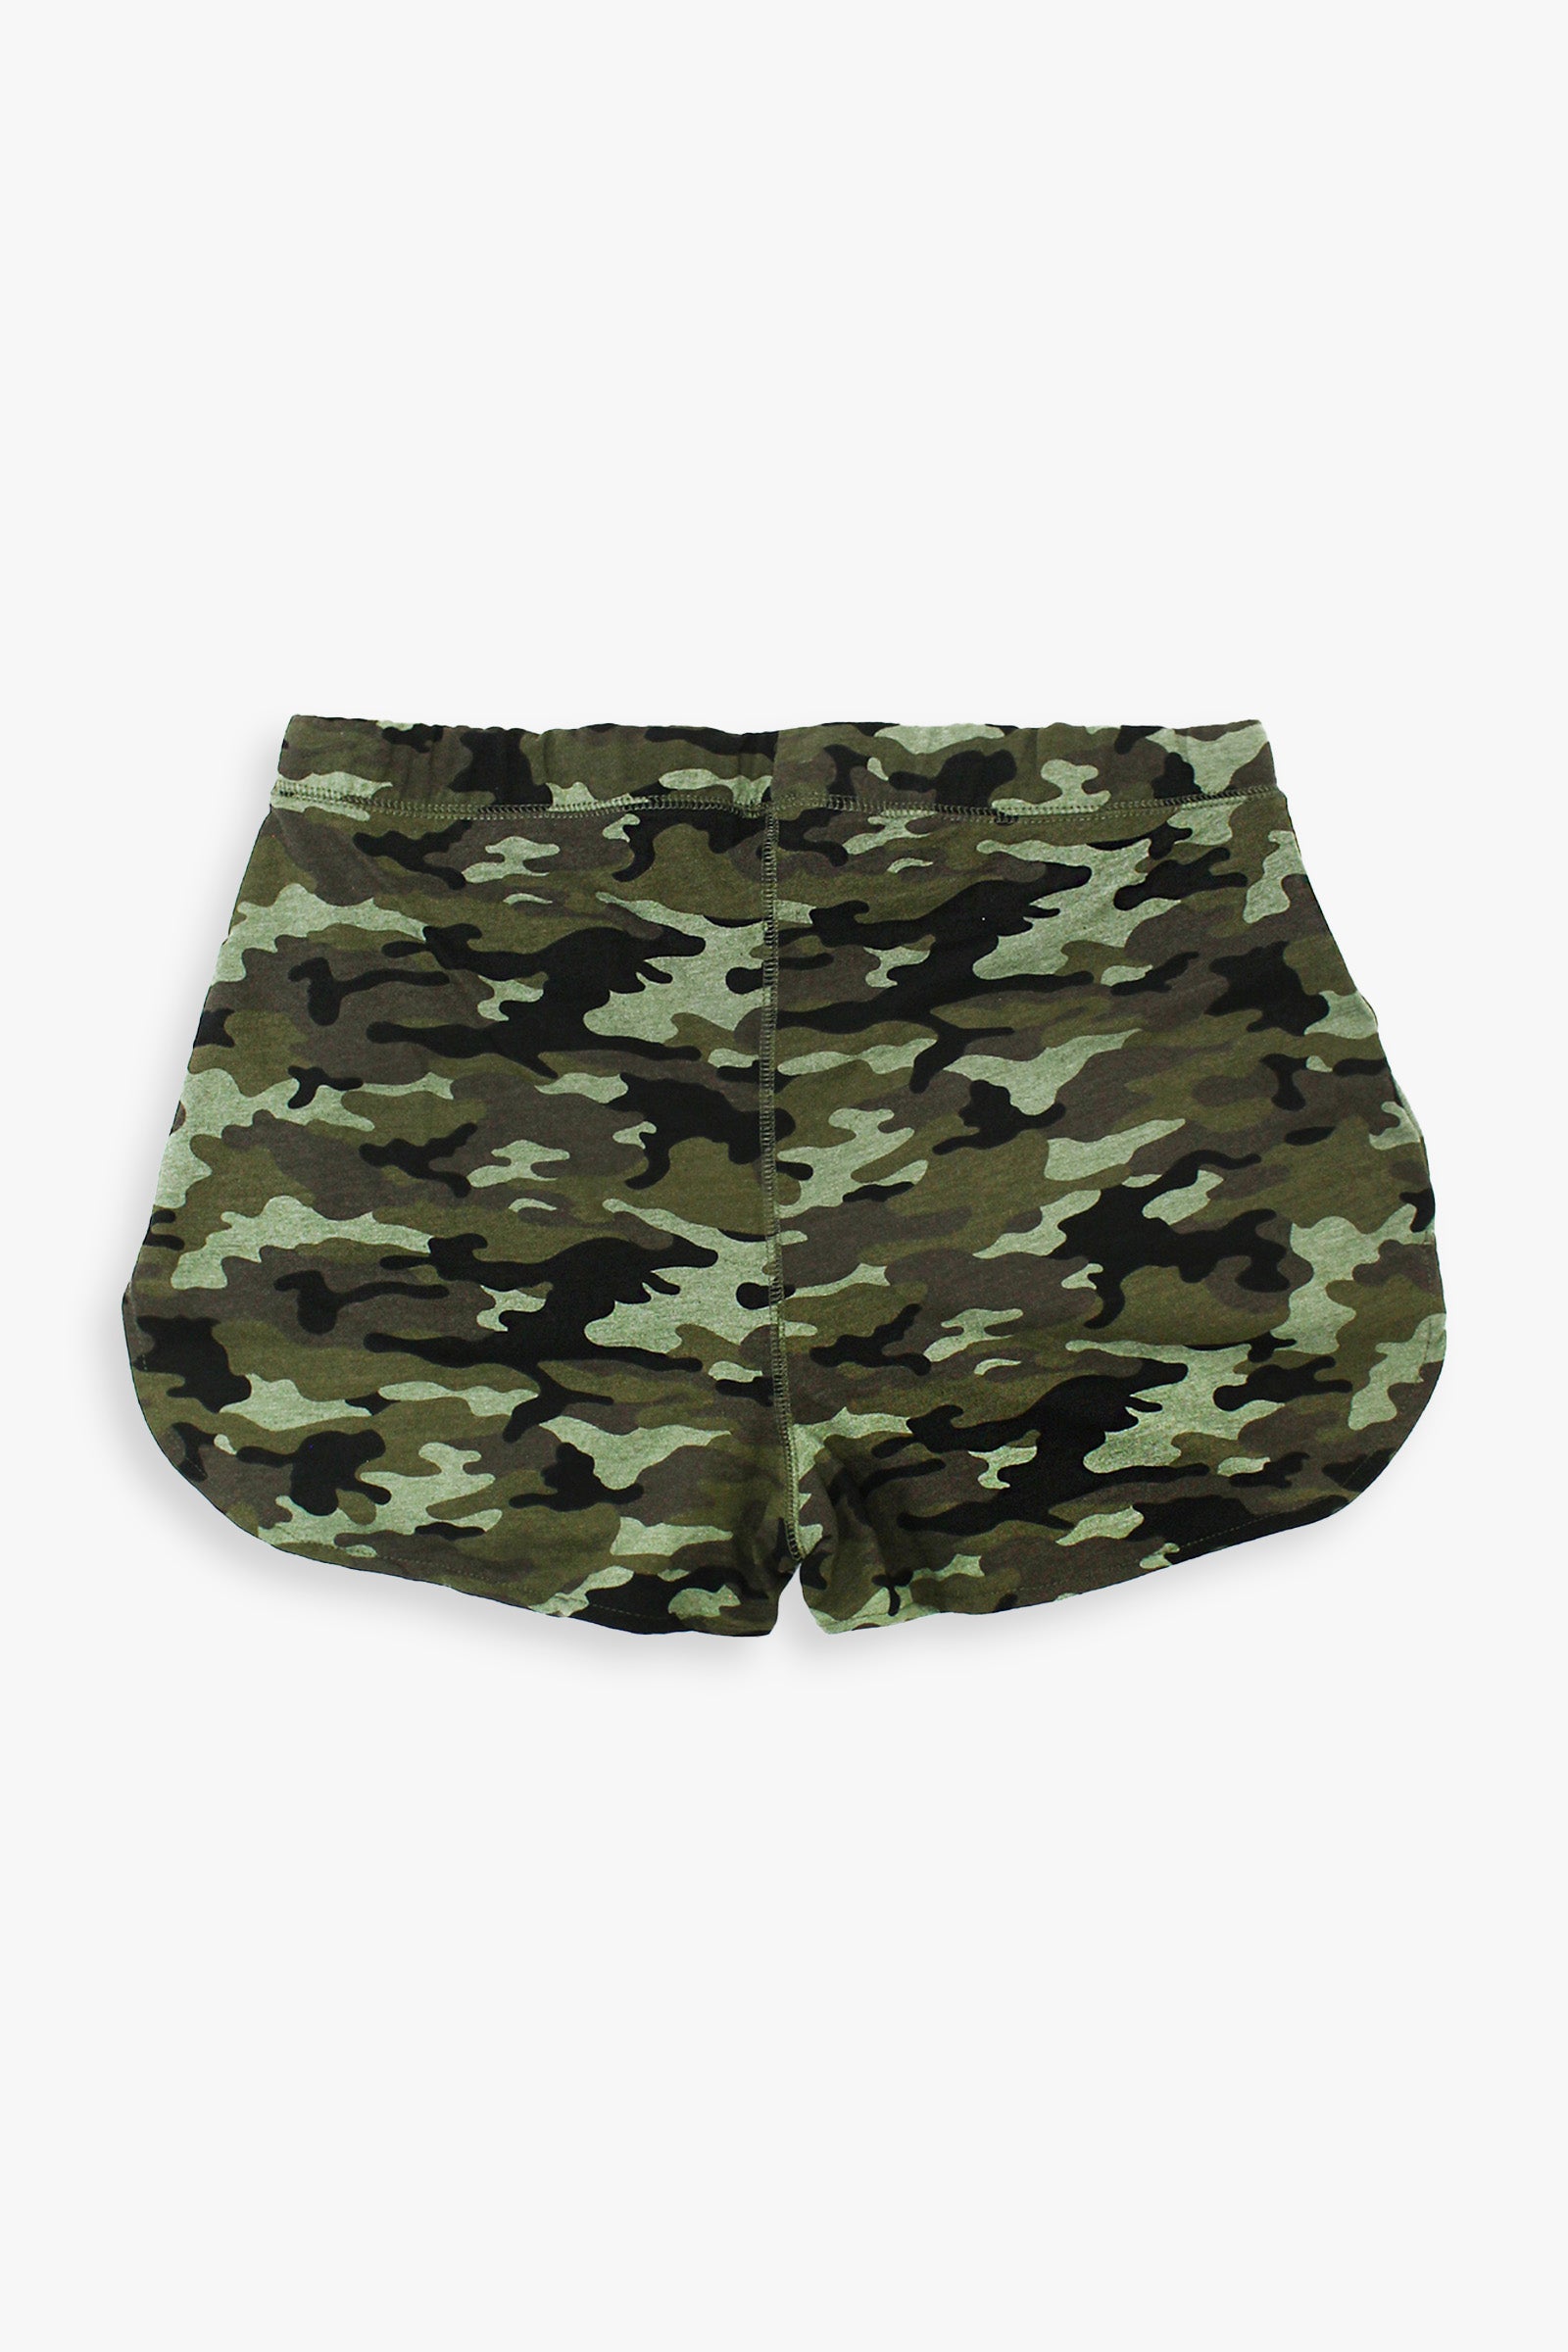 Great Northern Ladies Camouflage French Terry Shorts